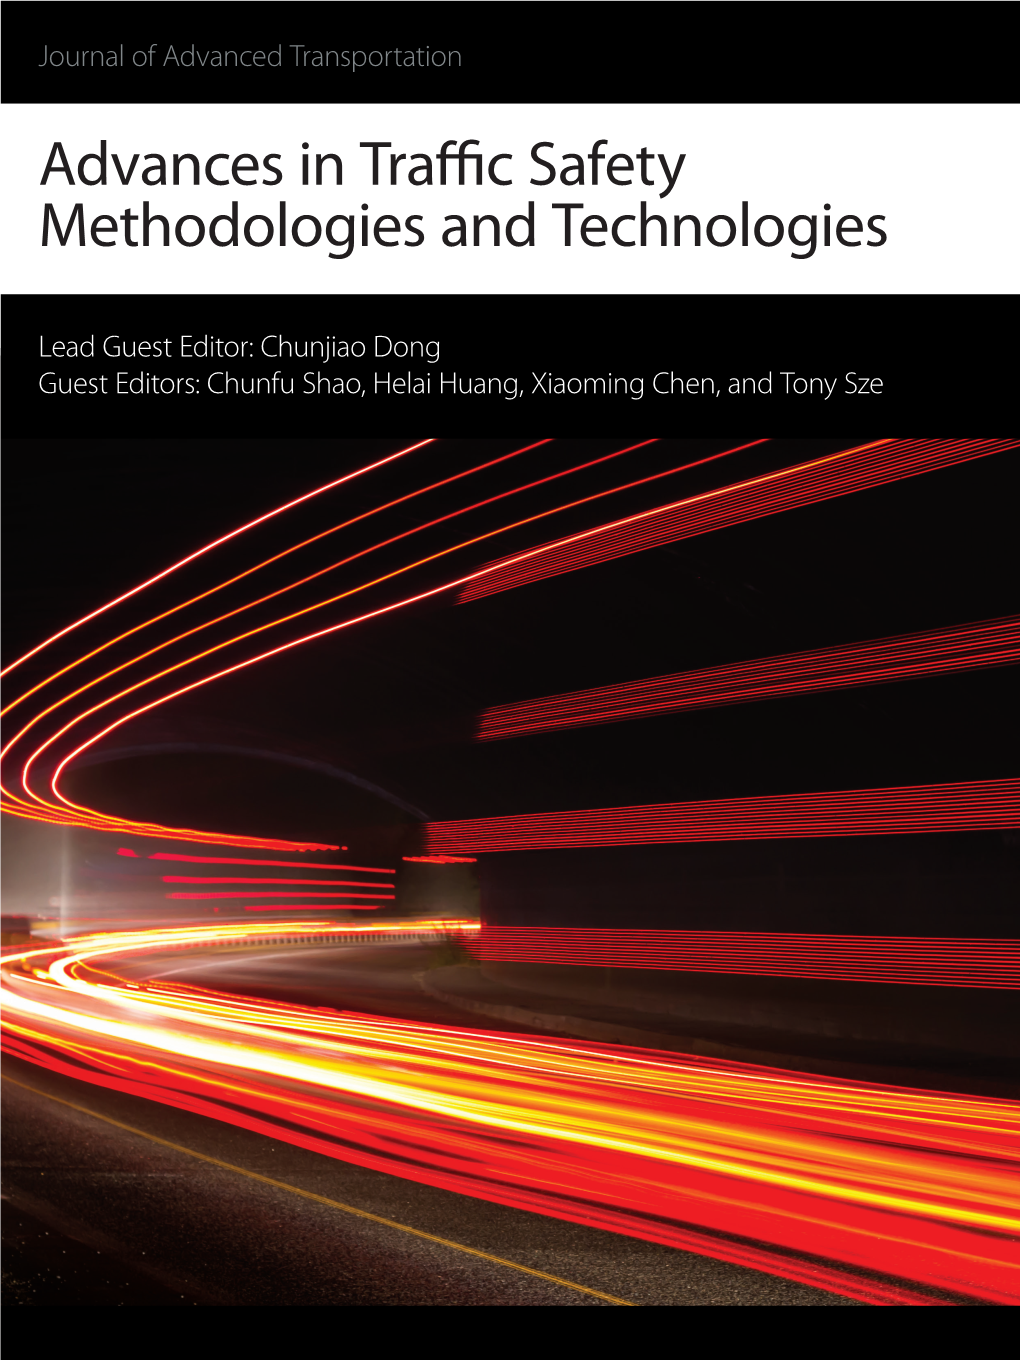 Advances in Traffic Safety Methodologies and Technologies